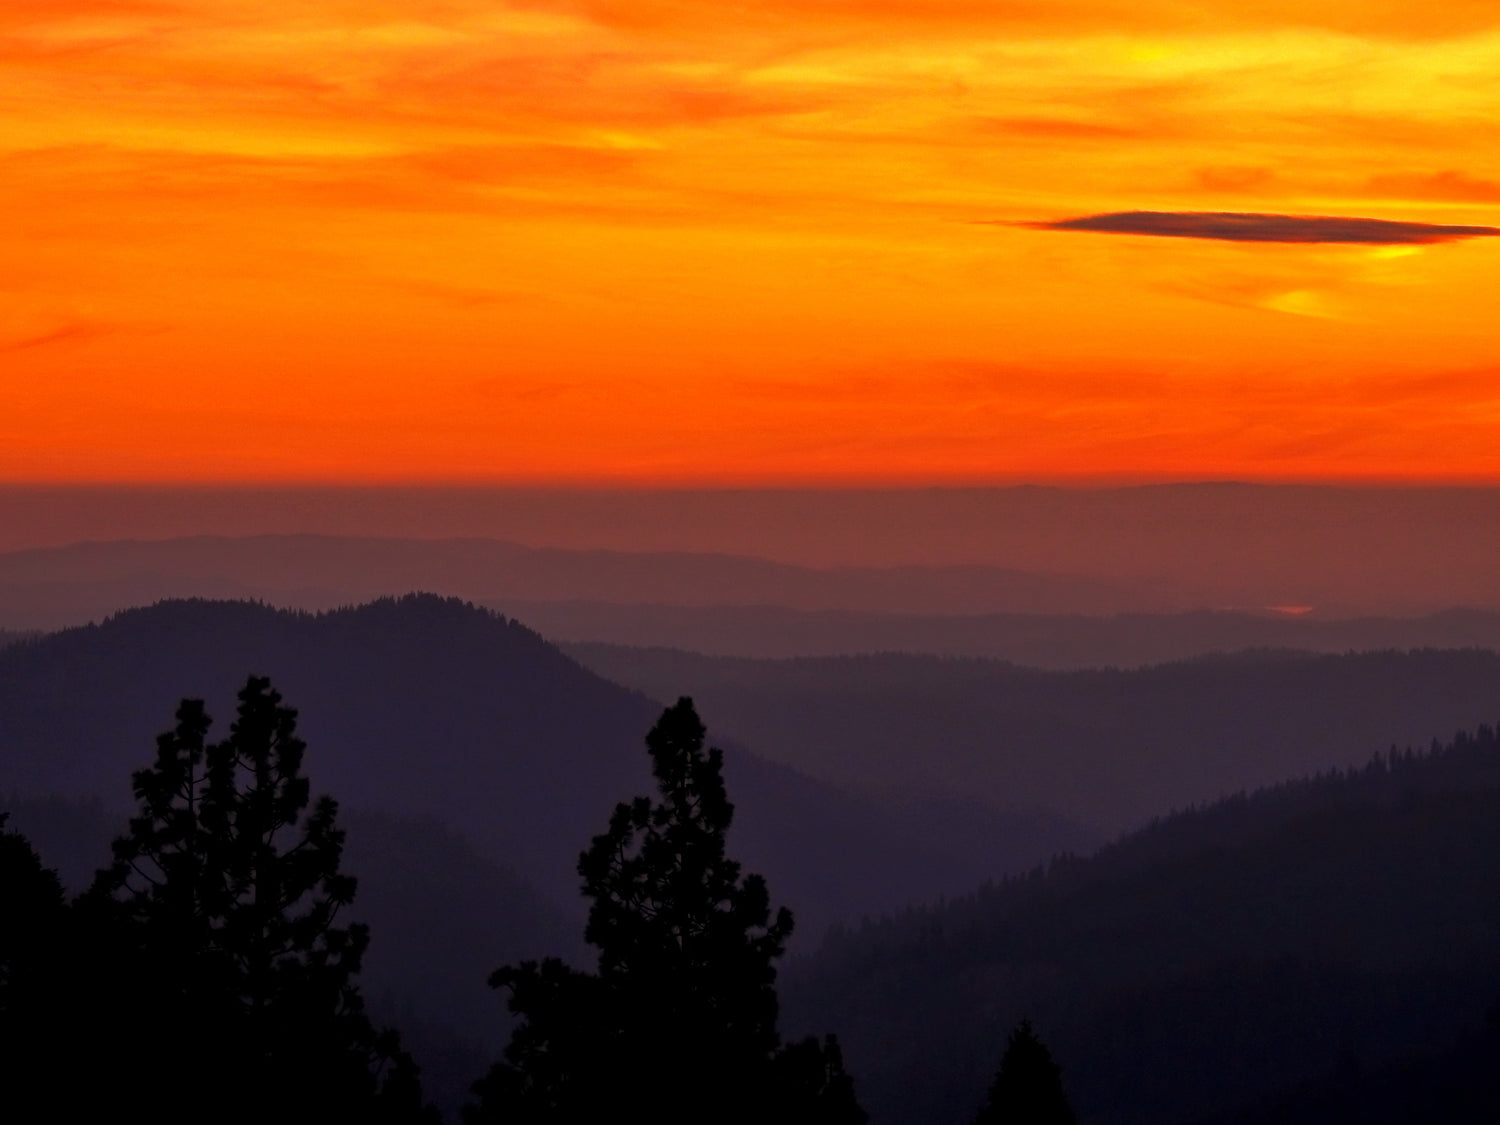 fiery sunset at the top of the mountain, looking across the mountain range